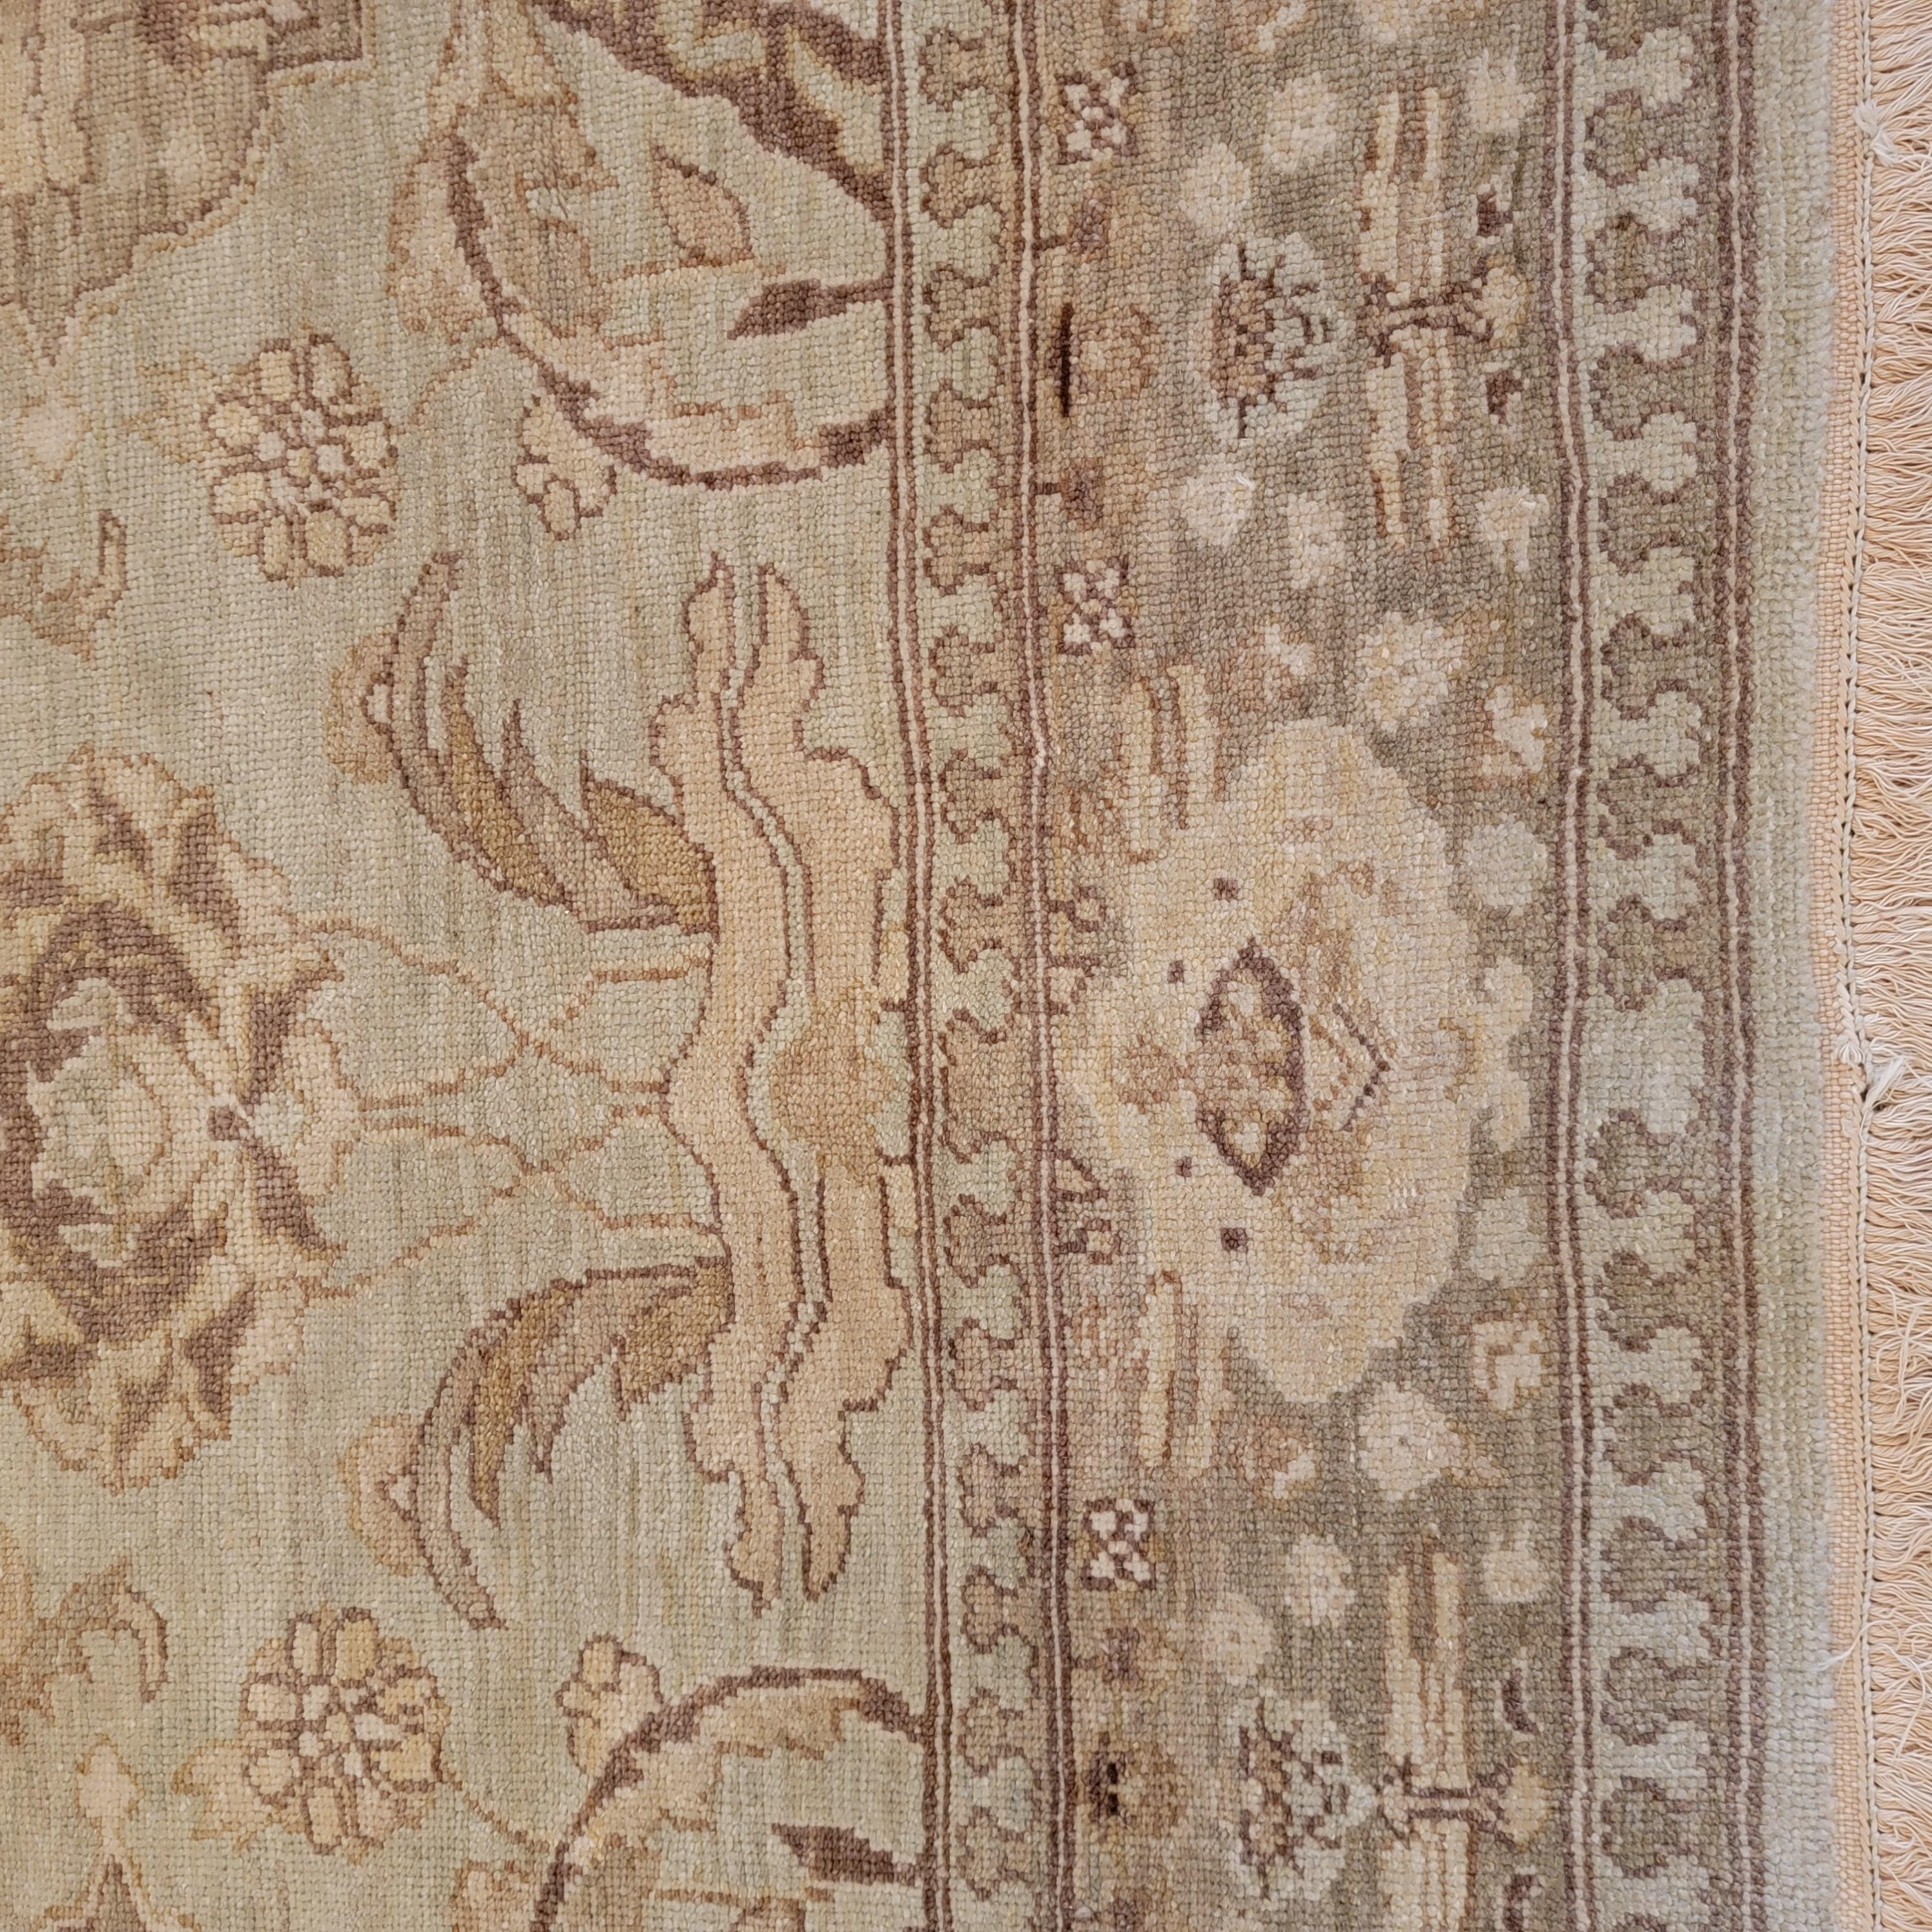 Pakistani Beautiful Neutral Indo Sultanabad Style Area Rug For Sale